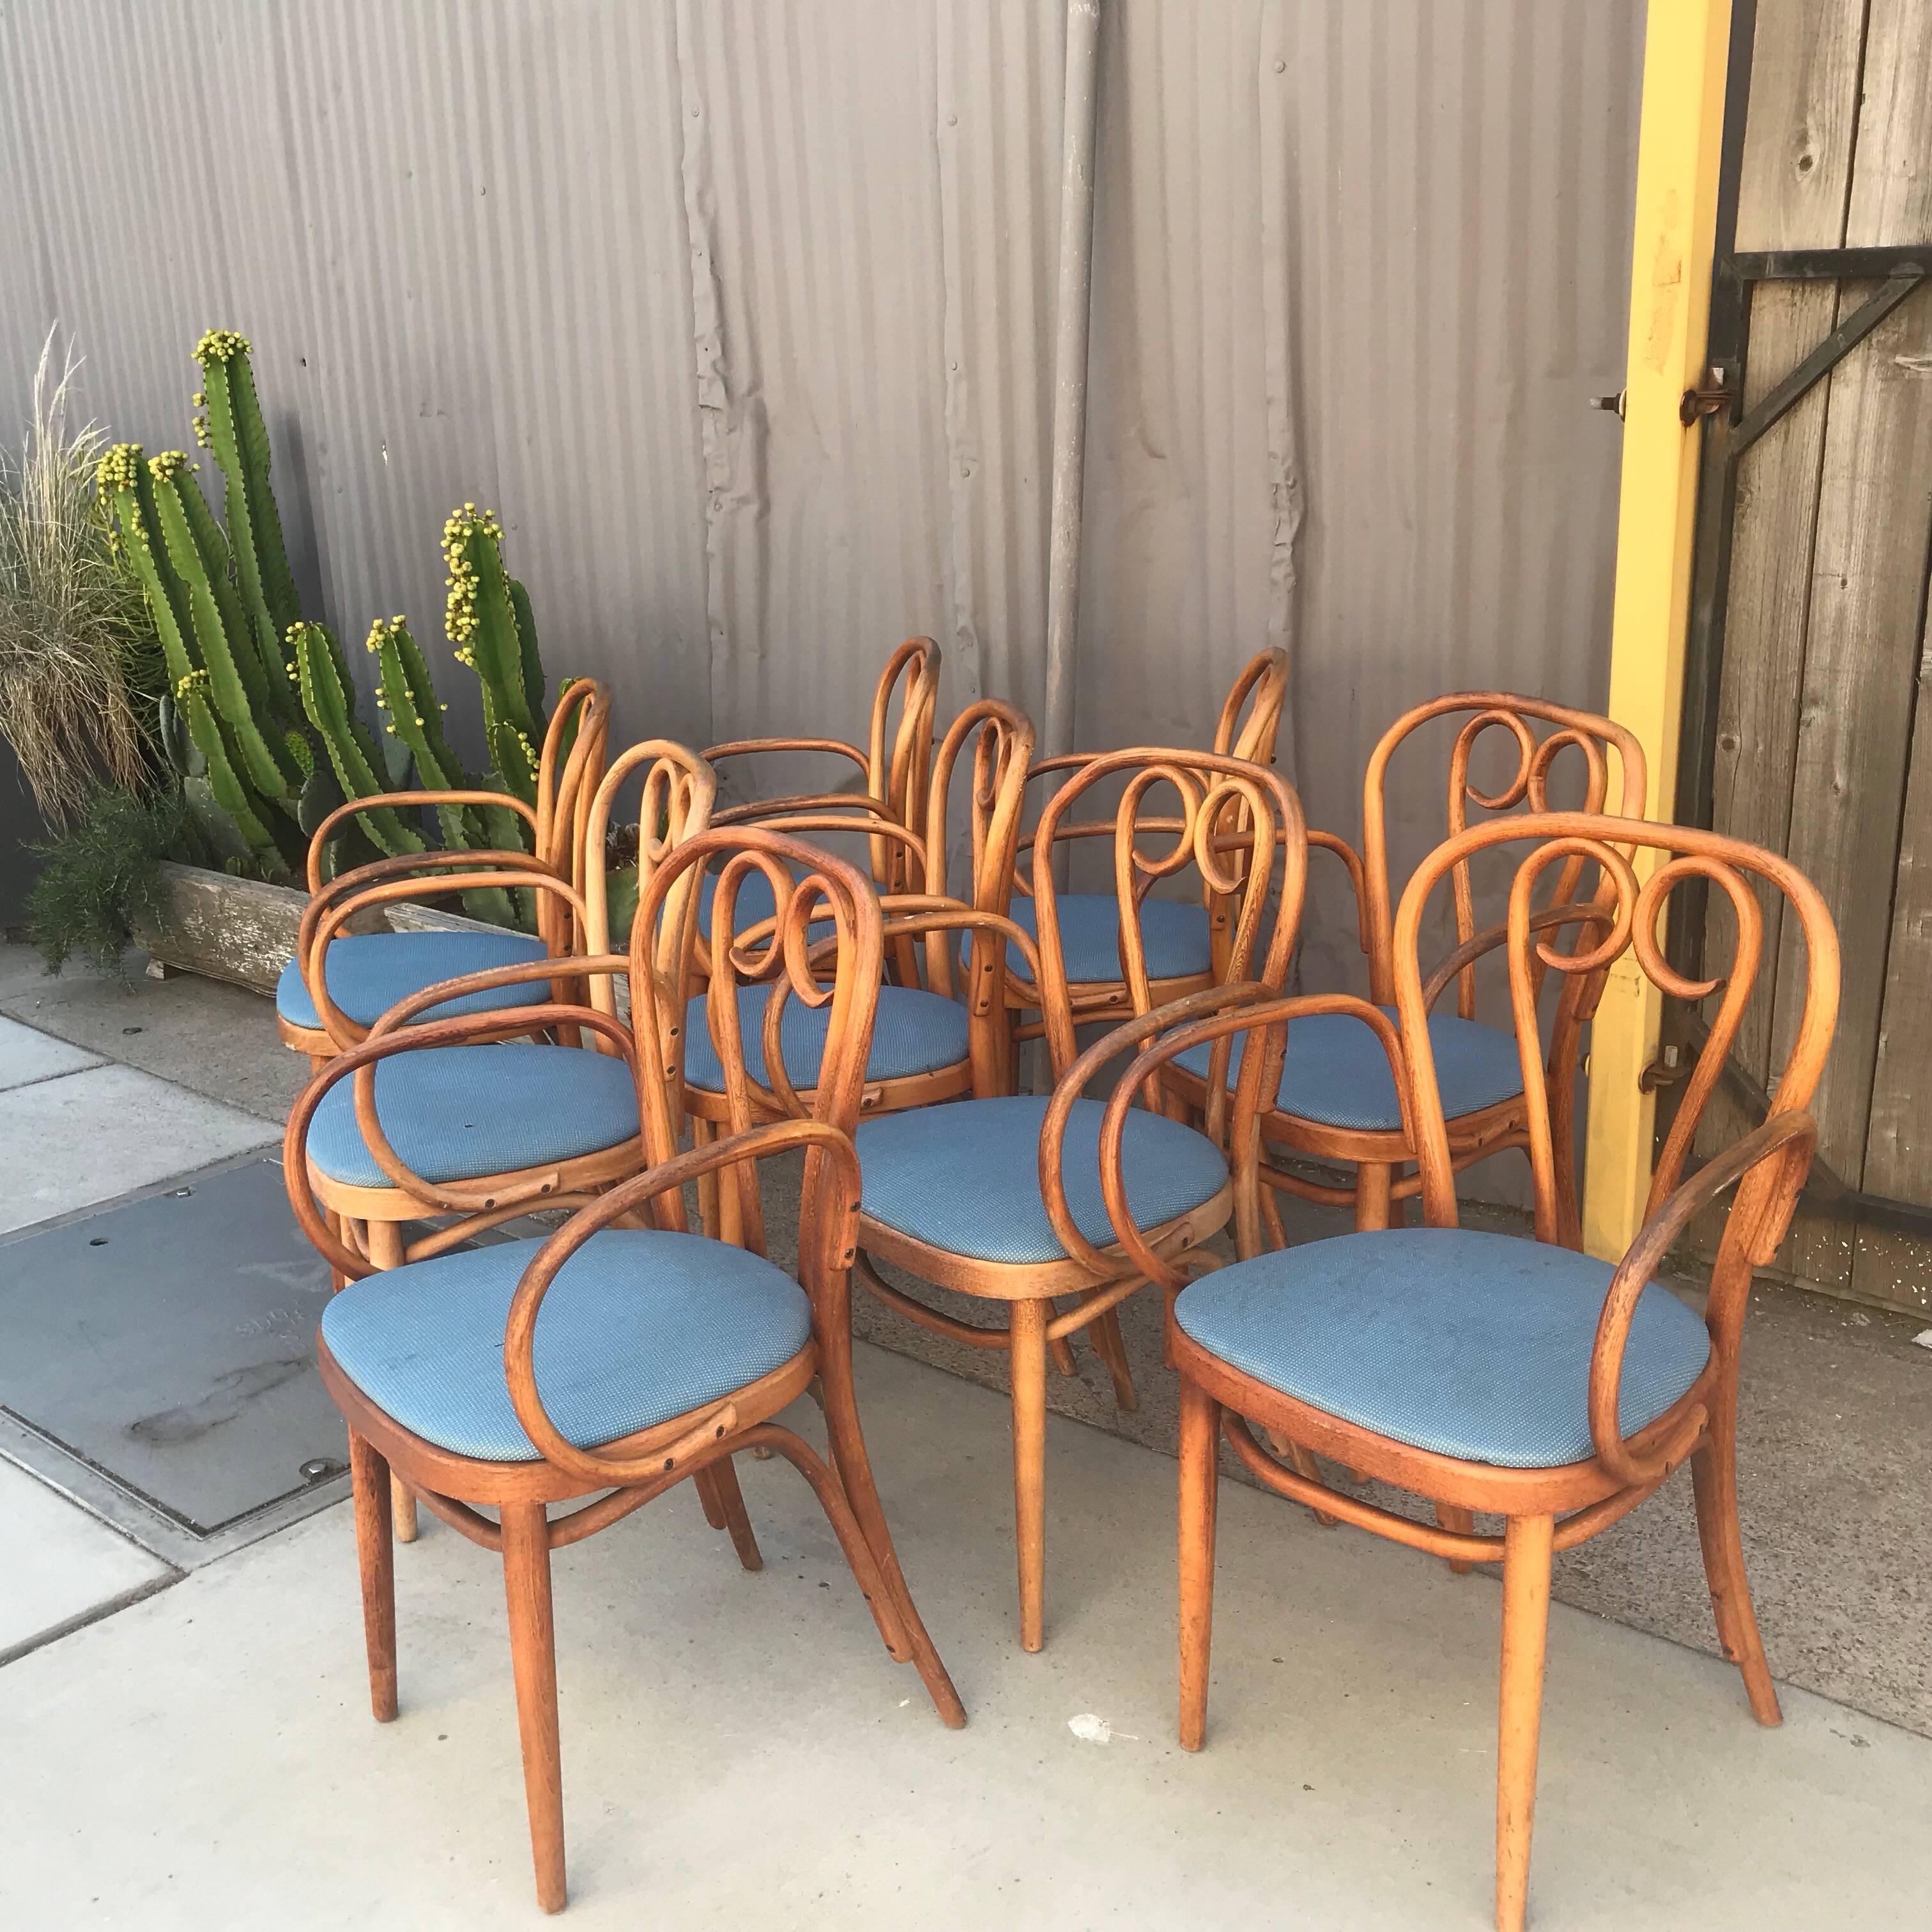 For your consideration a set of nine Vintage Thonet bentwood armchairs.
Price per chair. $500 
 
 Original vintage condition, refer to images. 
 
Measures: 35 3/4